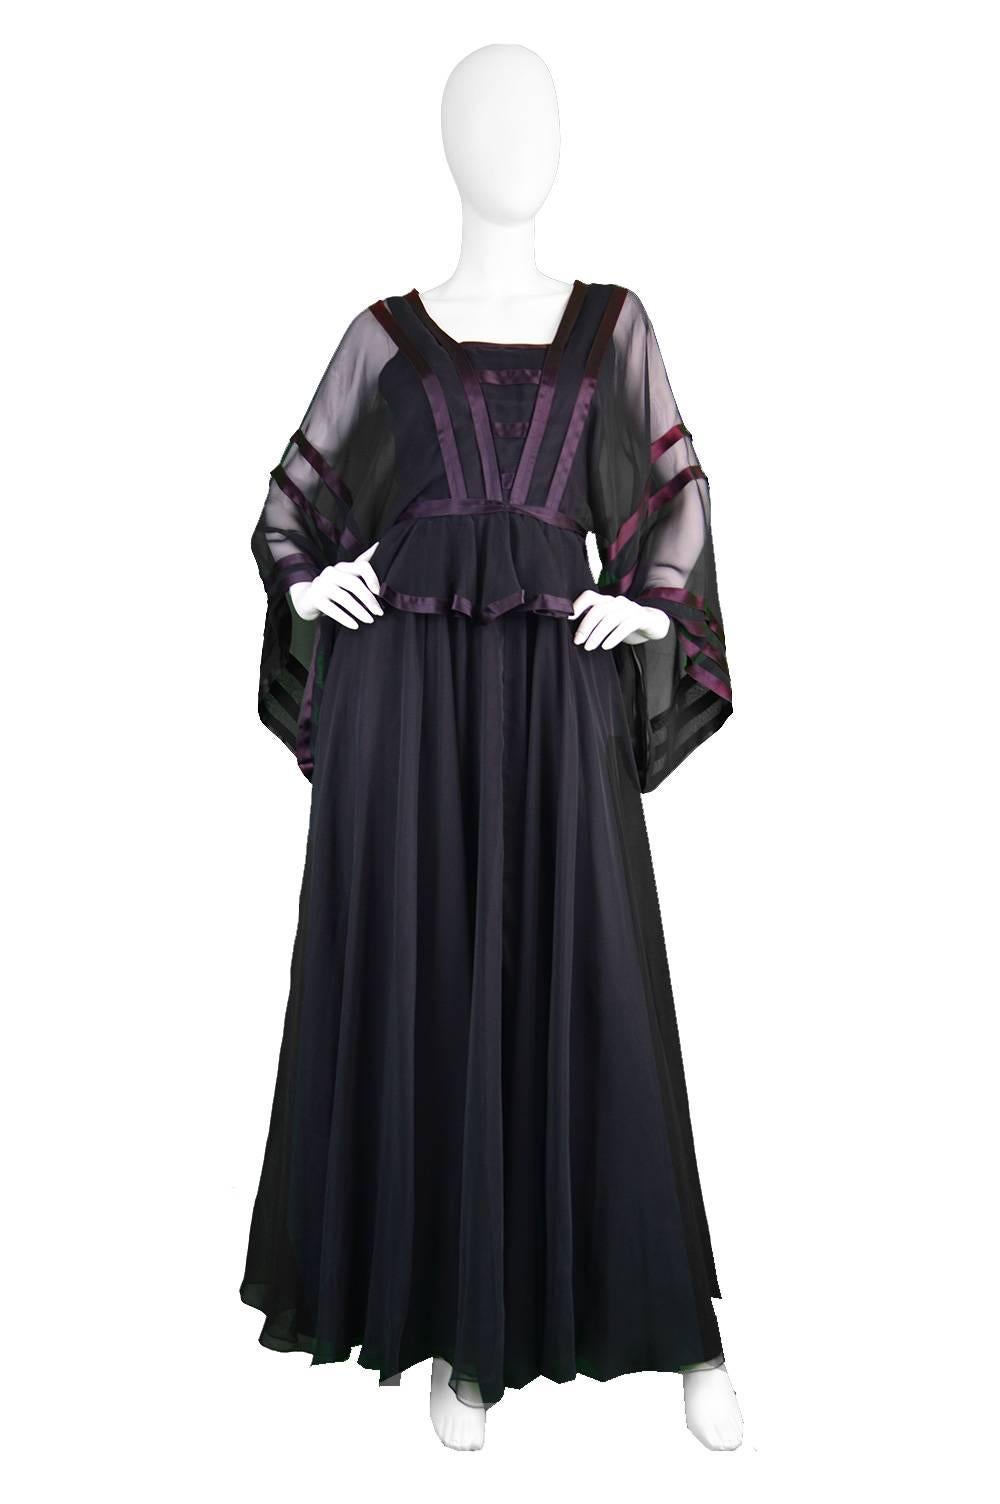 An incredible vintage evening gown from the 1970's by genius and increasingly collectible vintage British designer, Jean Varon (aka John Bates). With wide, almost kimono style sleeves in a black chiffon, with a satin trim which almost gives an